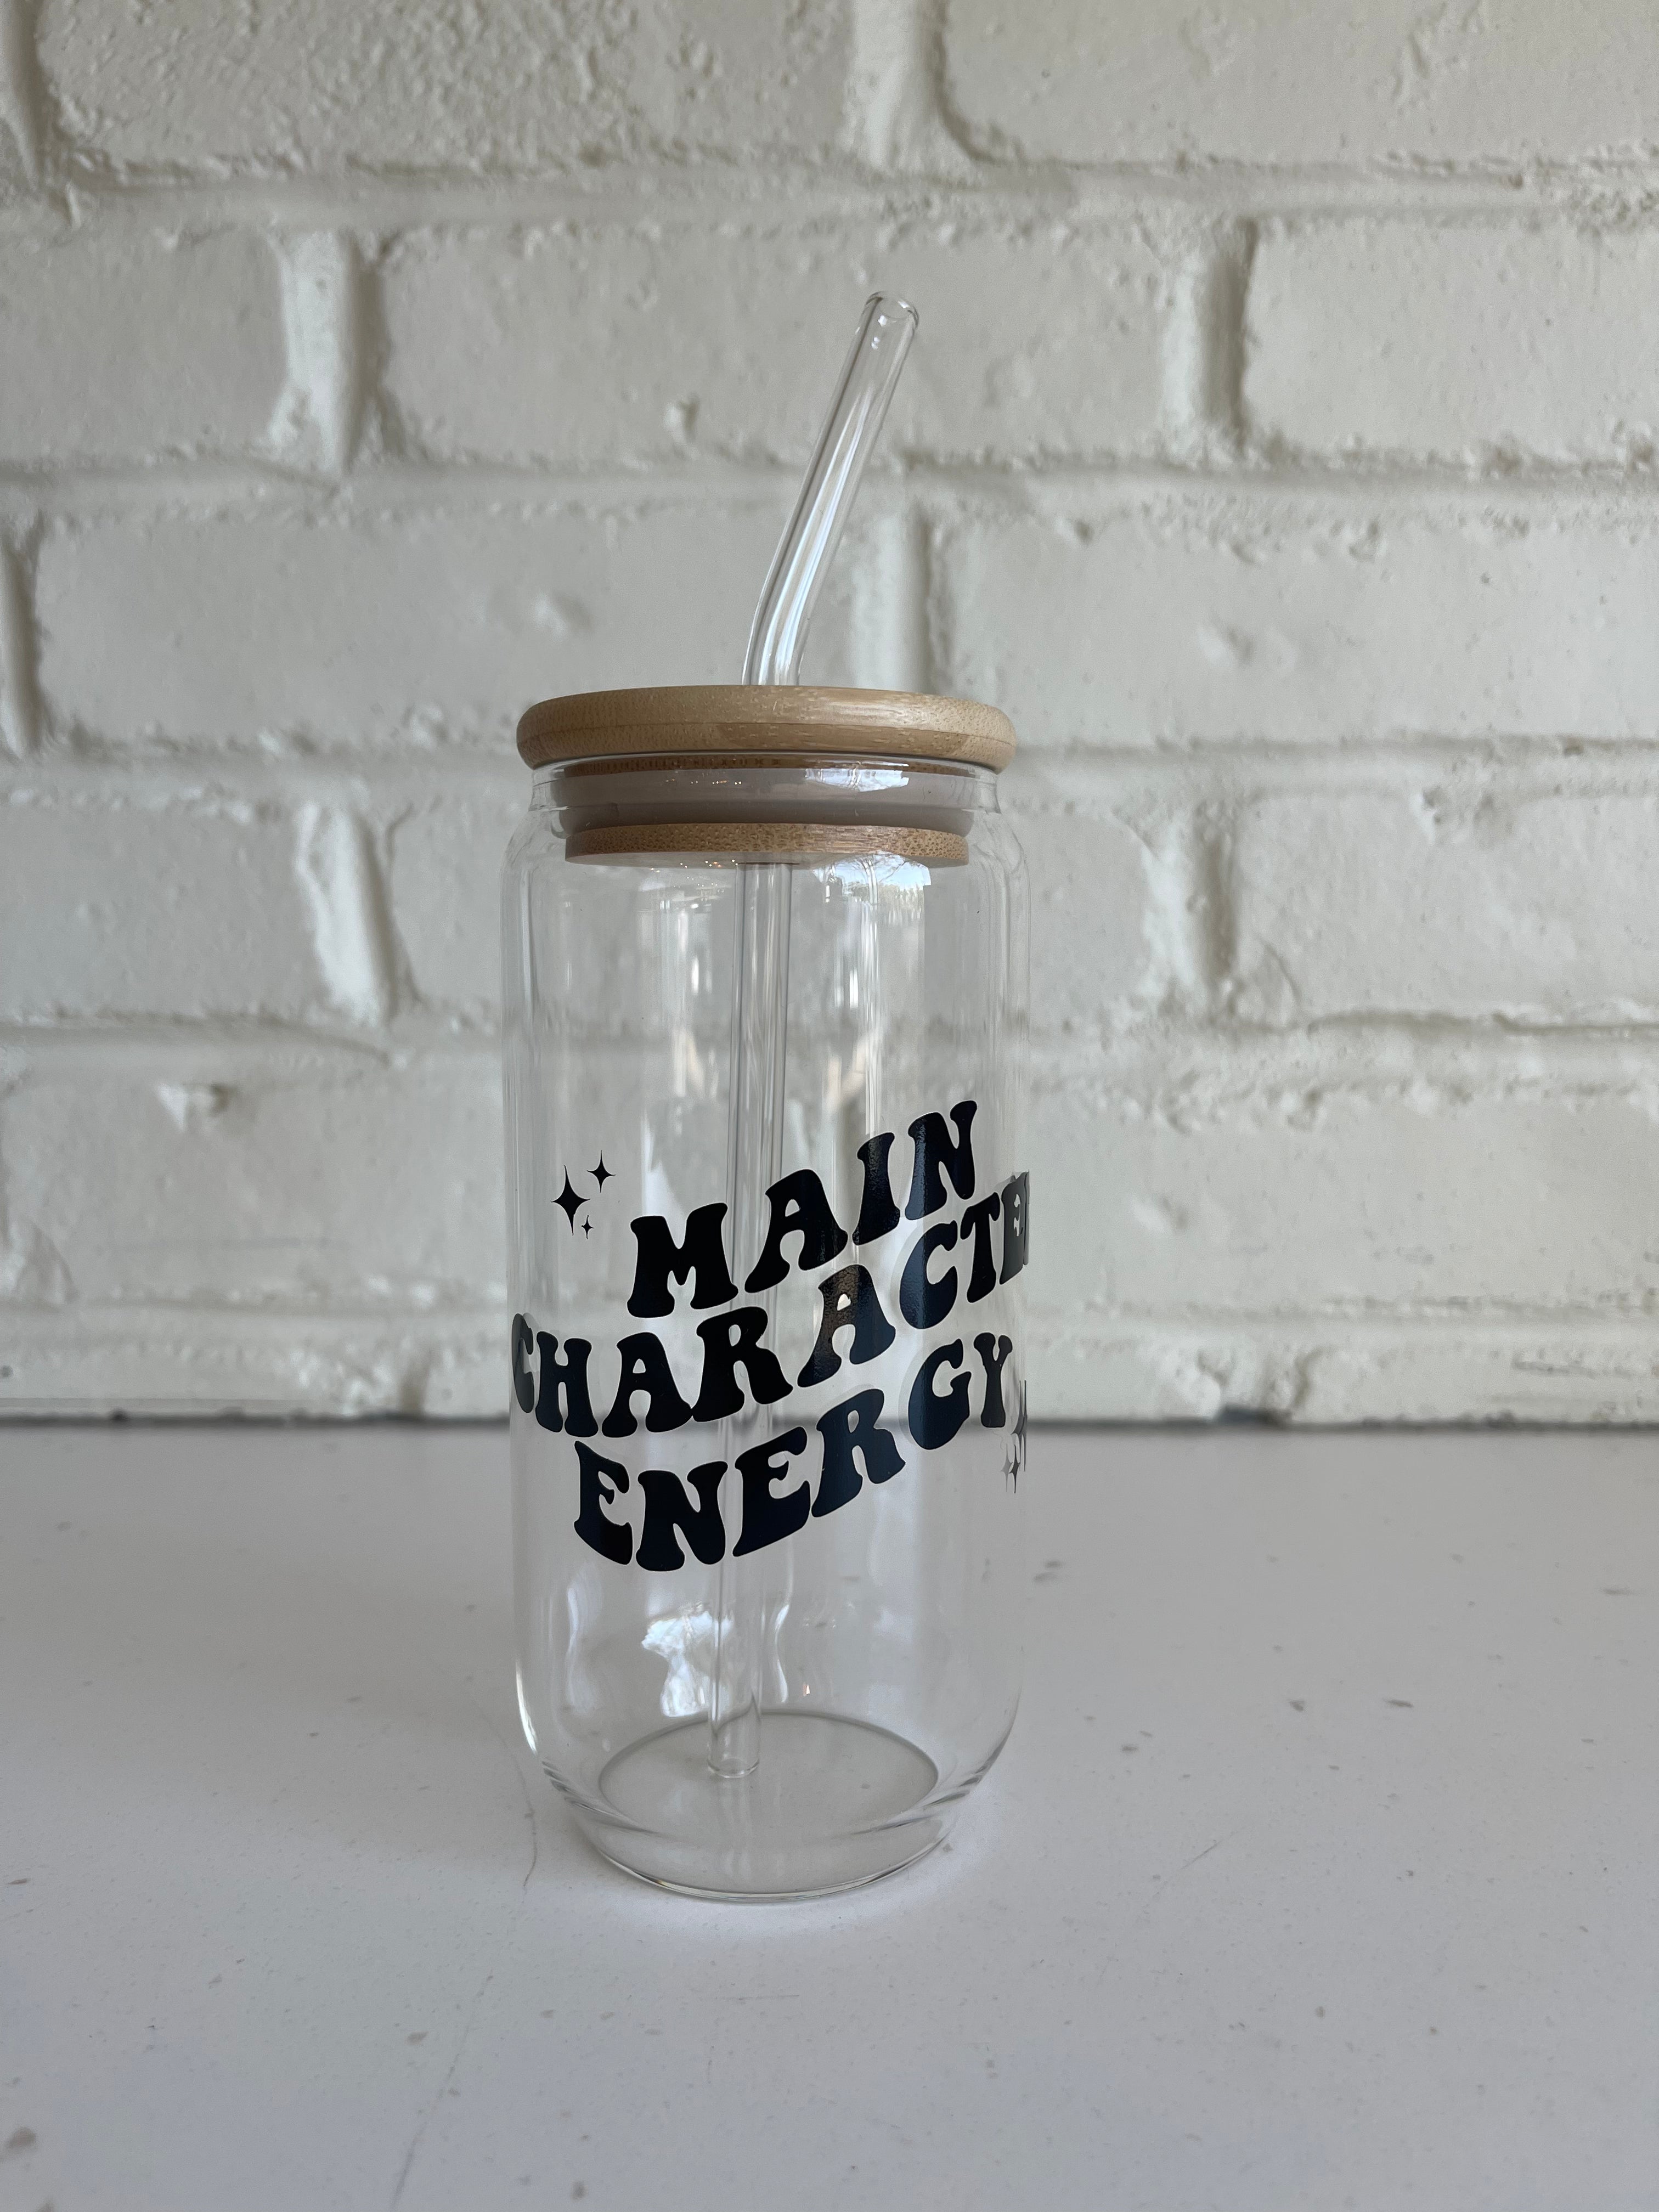 Main Character Energy Glass Cup